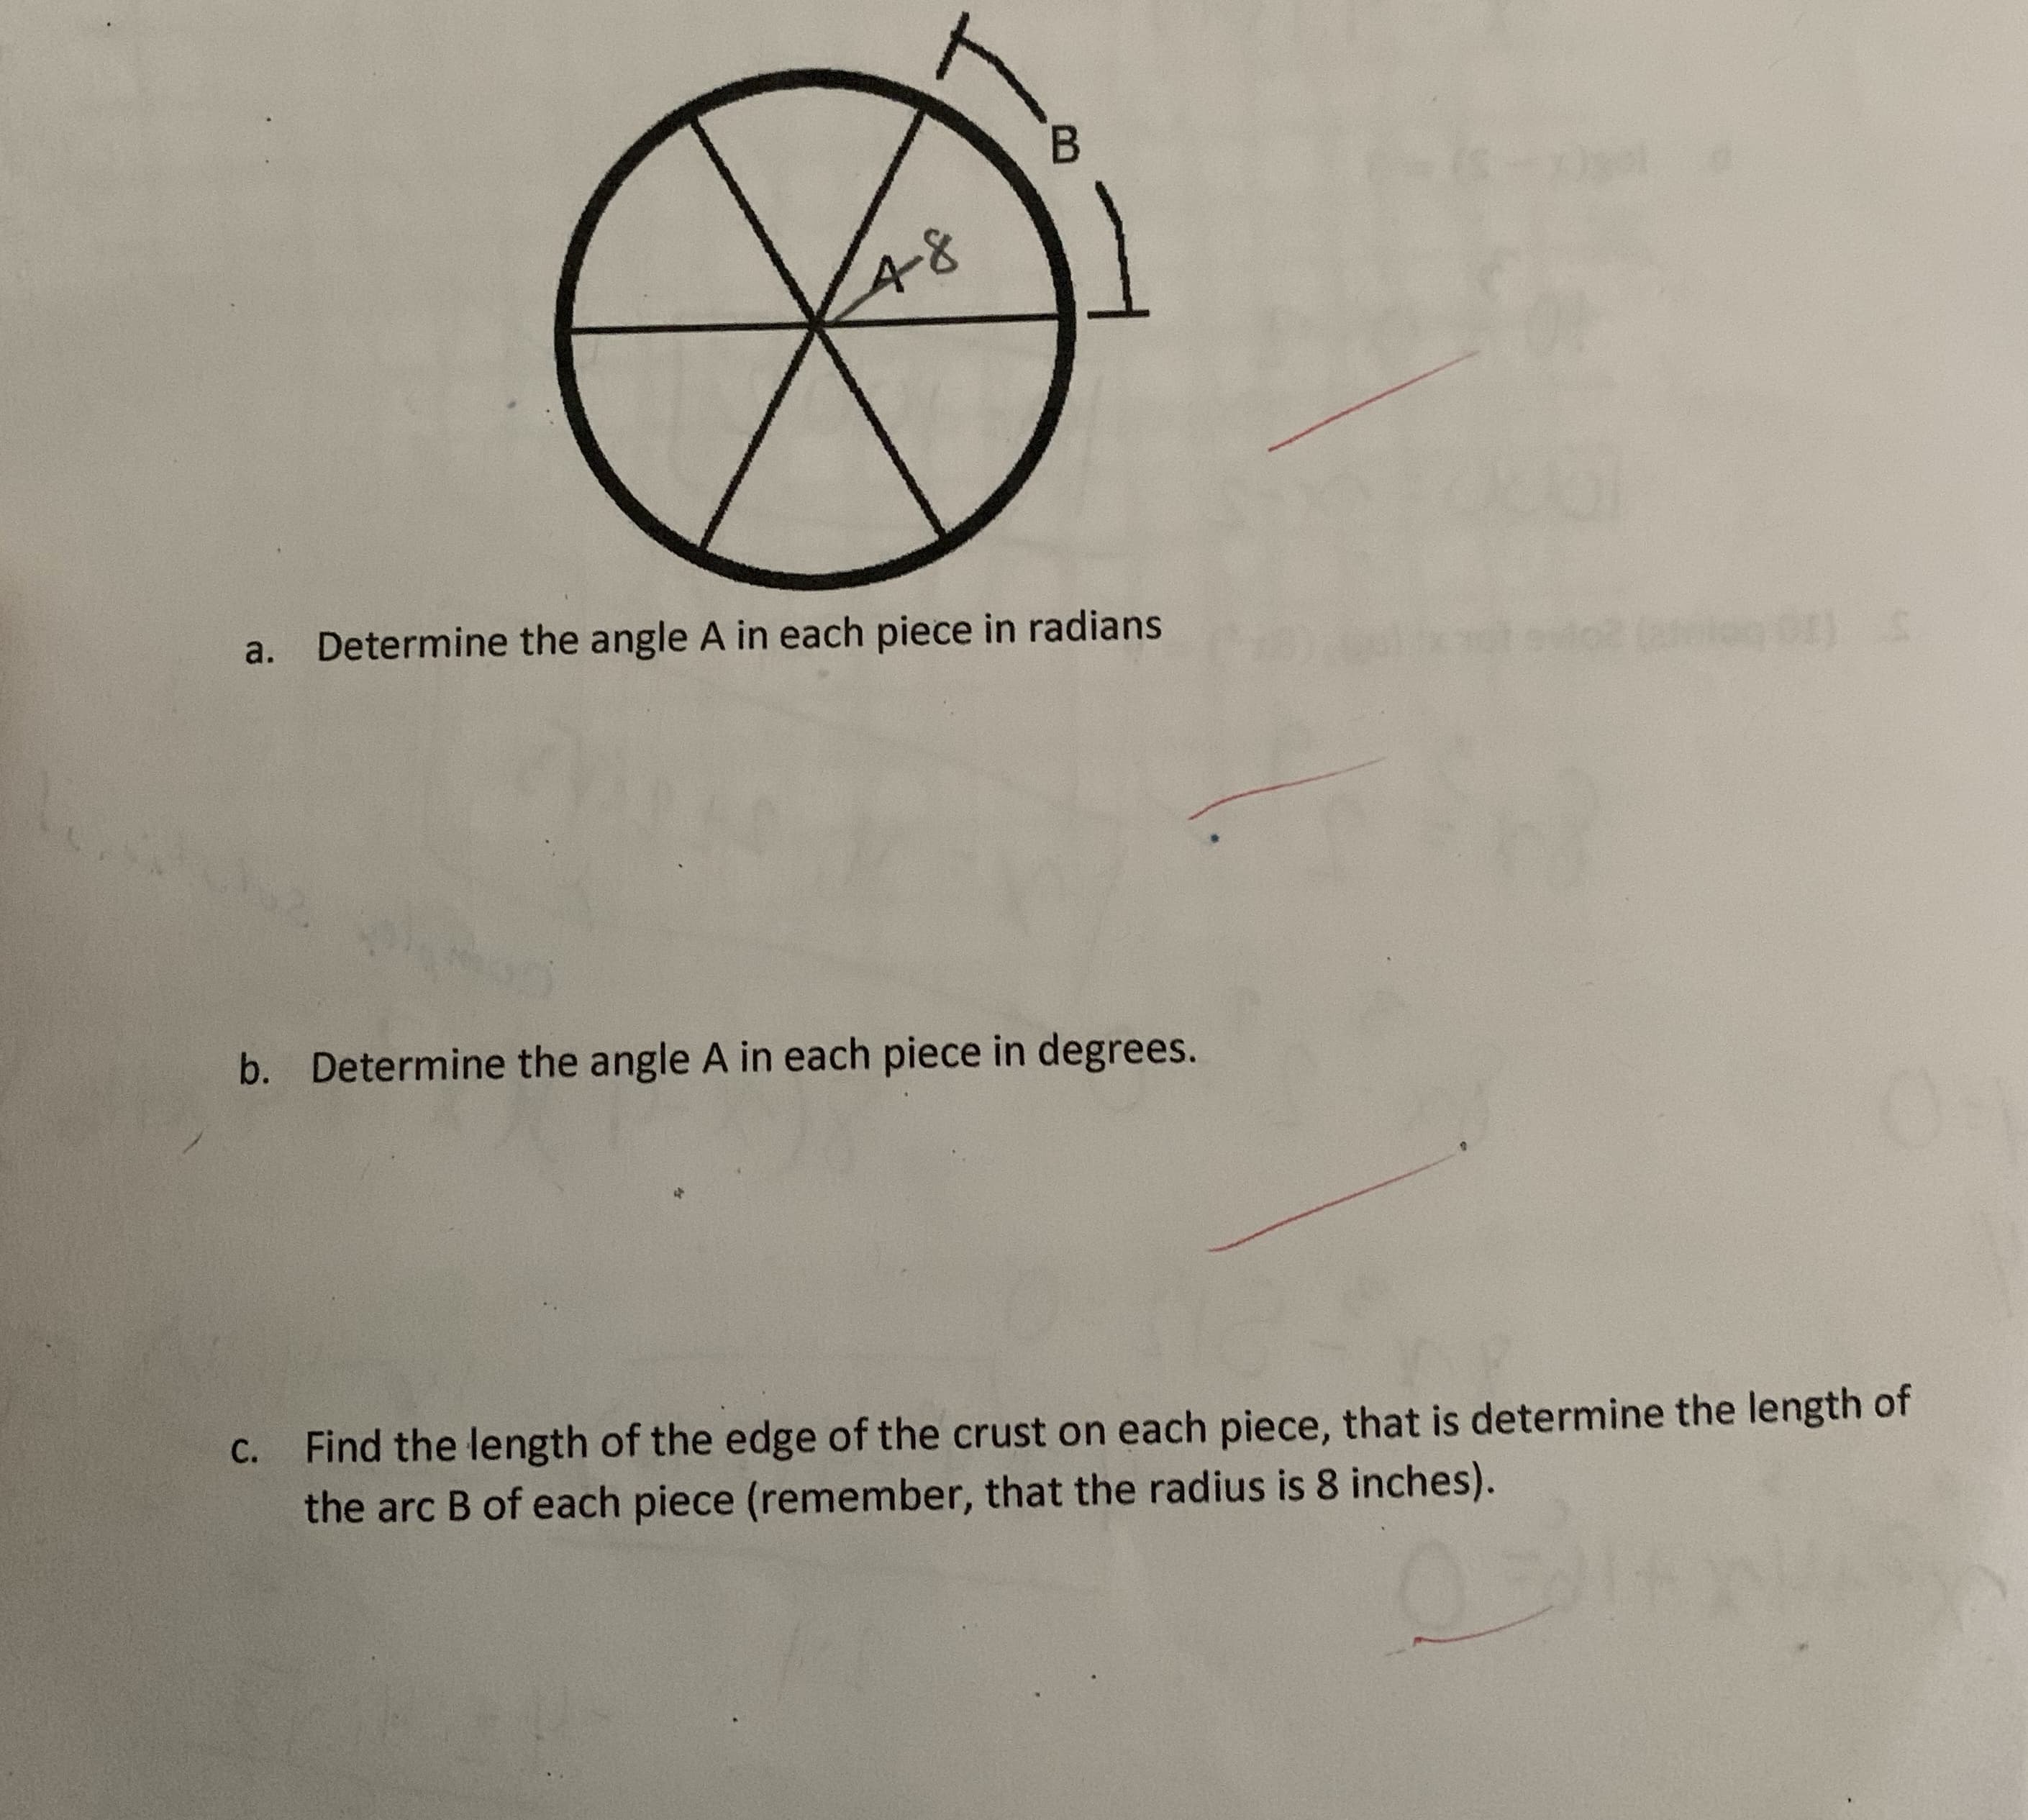 48
a. Determine the angle A in each piece in radians
b. Determine the angle A in each piece in degrees.
C. Find the length of the edge of the crust on each piece, that is determine the length of
the arc B of each piece (remember, that the radius is 8 inches).
